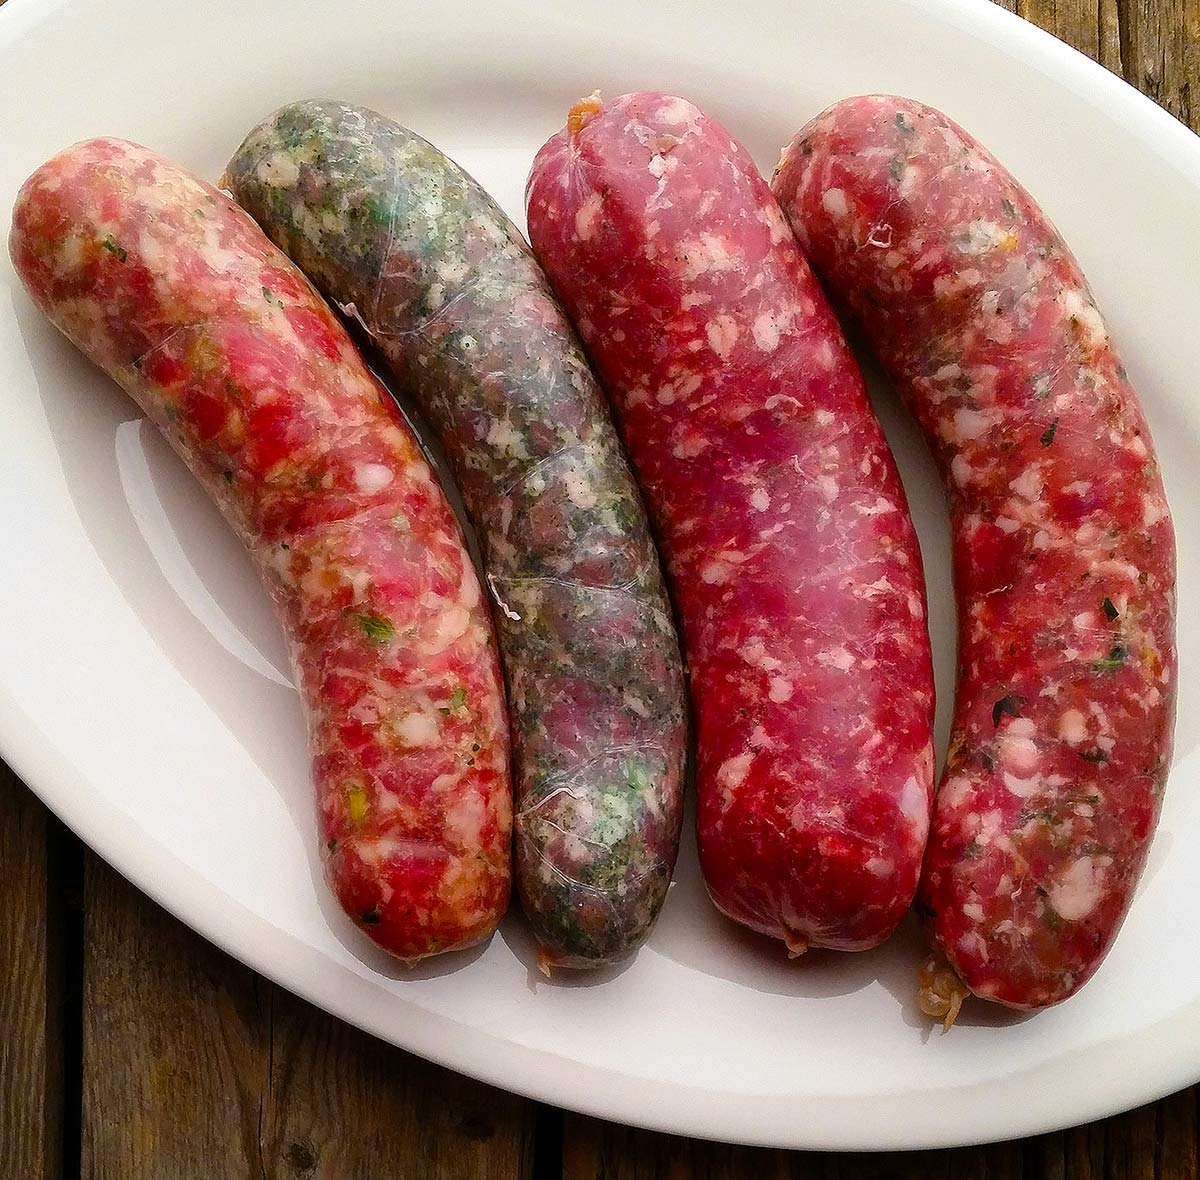 Four varieties of fresh, homemade sausages on a plate